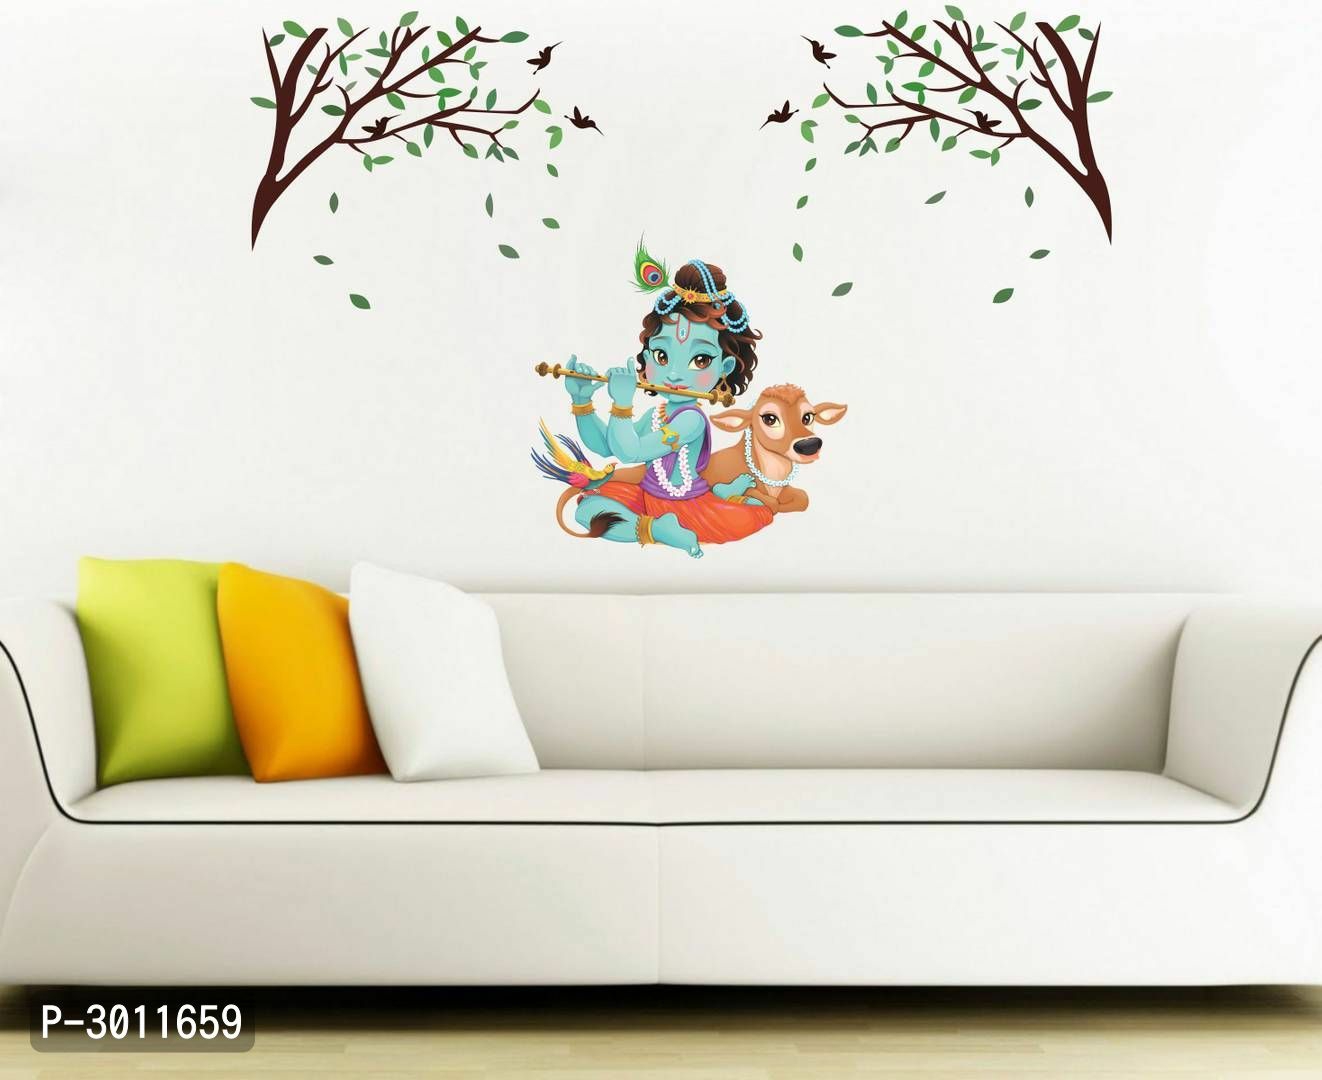 Wall Stickers   Wall Sticker For Living Room Bedroom Office Home Hall Decor   Kanhaya Playing With Flute  2 